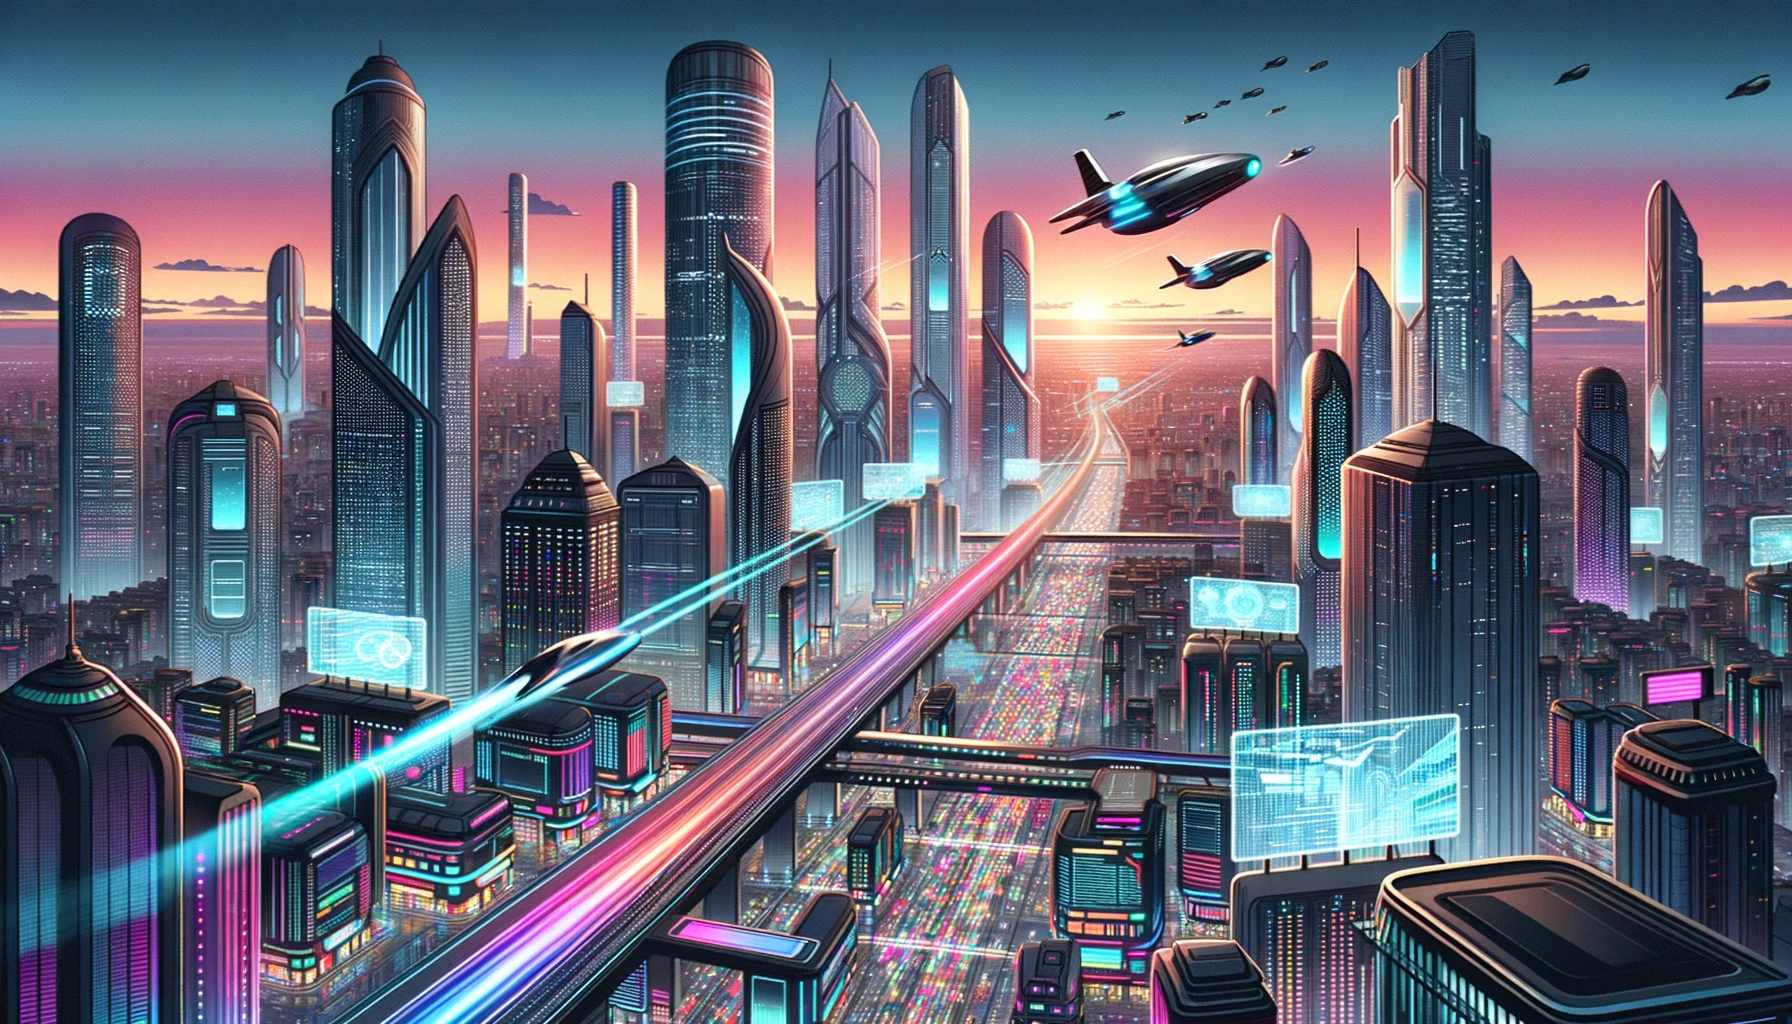 Illustration of a city of the future during twilight. The horizon is dominated by tall skyscrapers with a metallic sheen and large glass facades. Flying vehicles, resembling futuristic cars, navigate between the buildings, leaving streaks of light in their wake. Above, large holographic billboards project colorful images and animations, casting a neon glow over the cityscape.